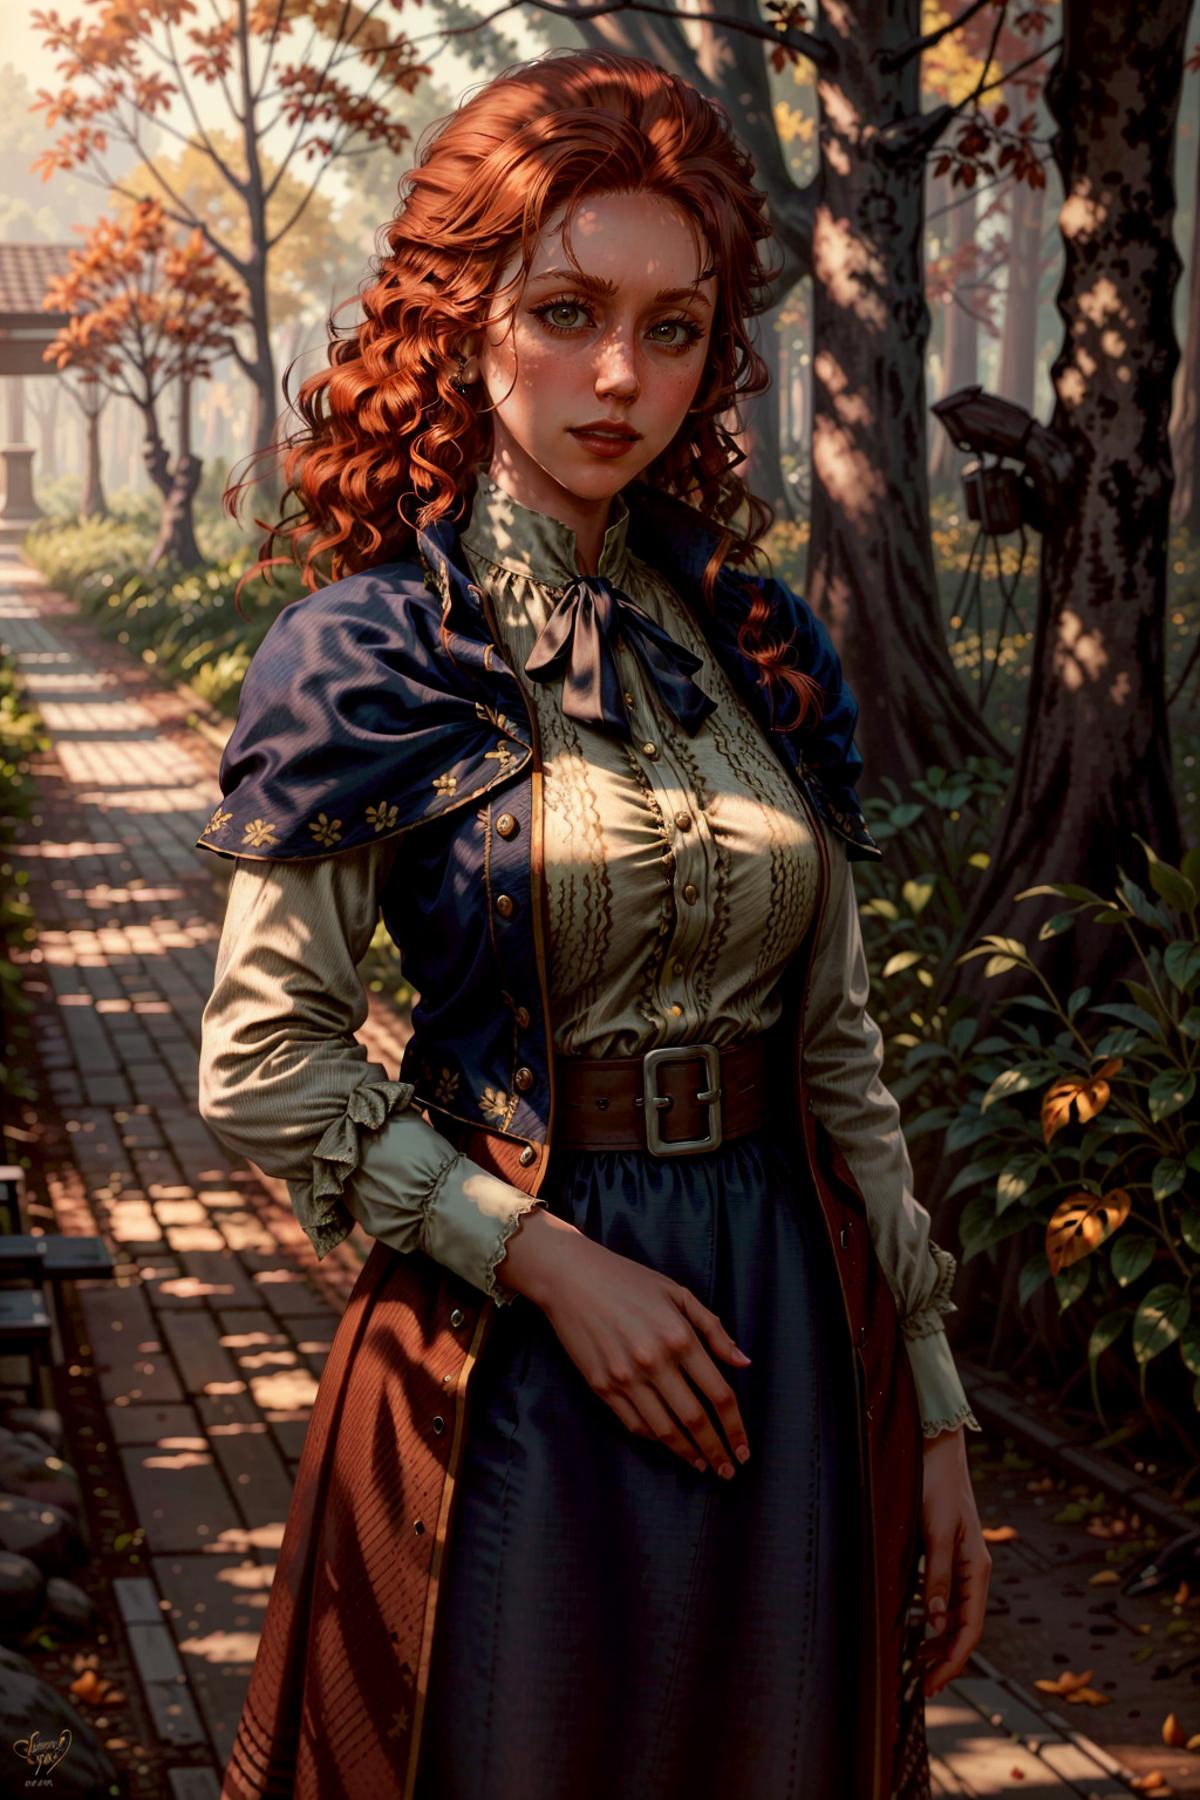 Molly from Red Dead Redemption 2 image by BloodRedKittie